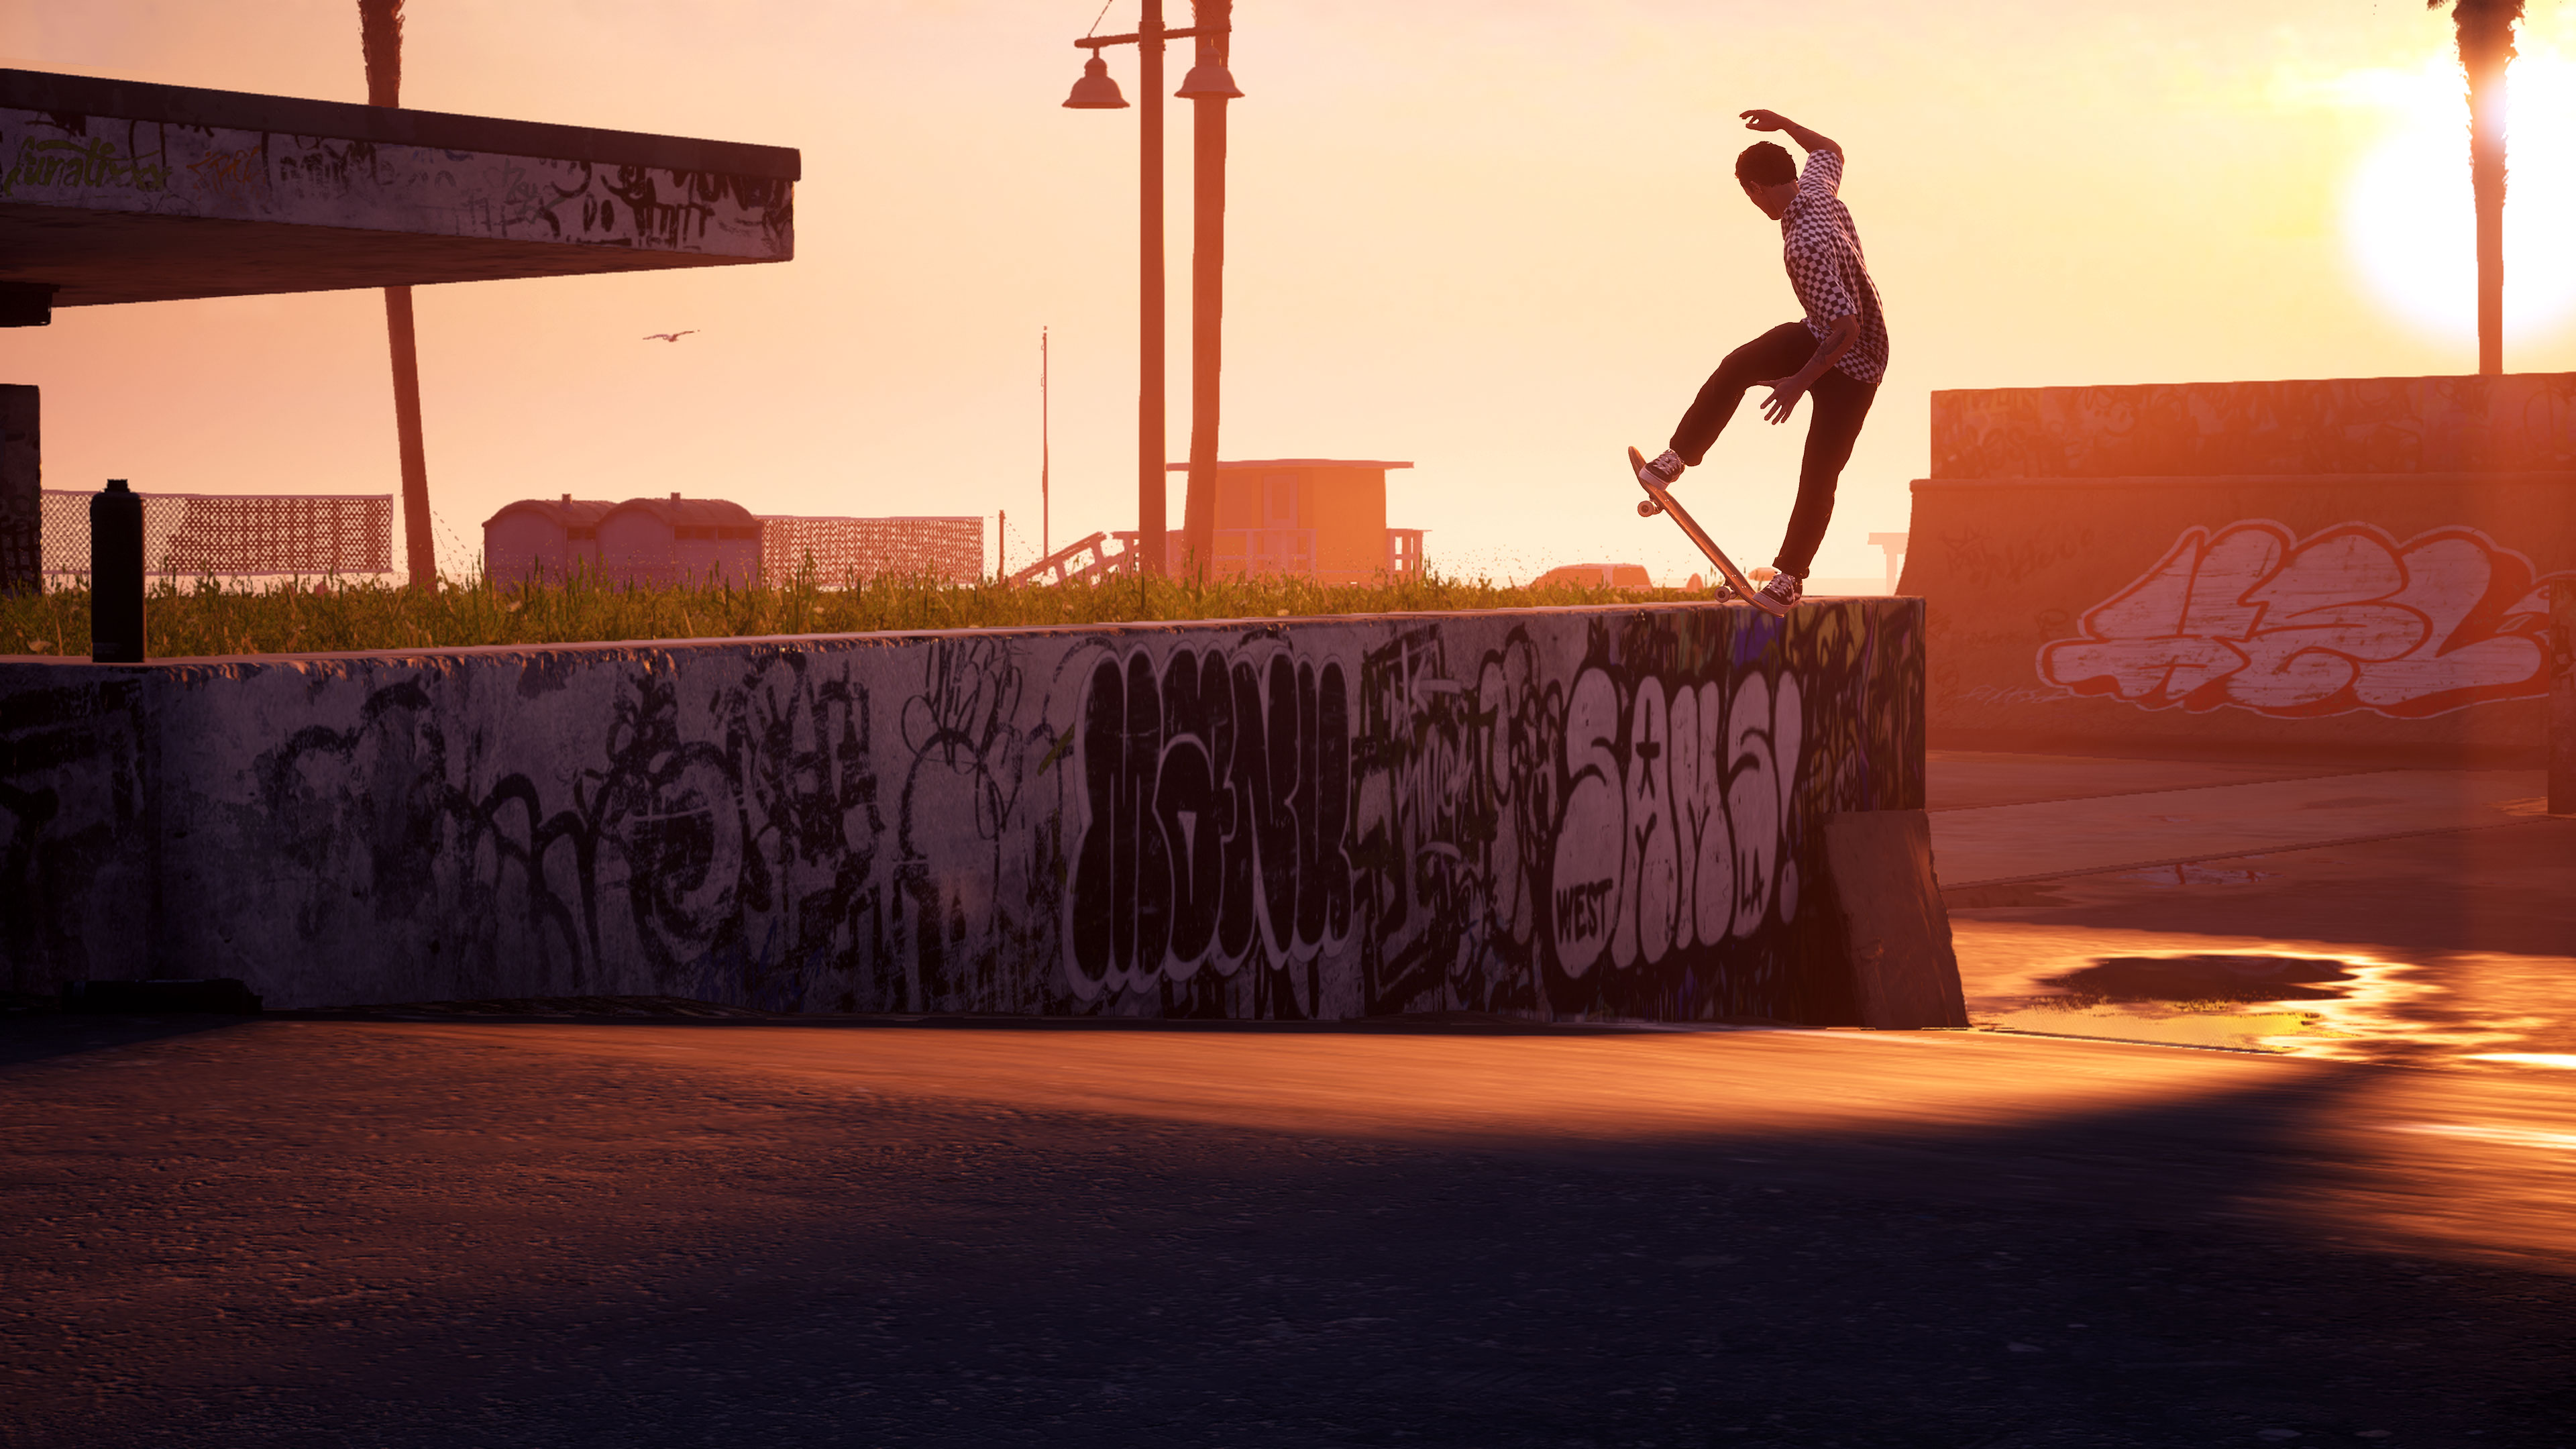 A skater does a lip trick against a sunset or sunrise